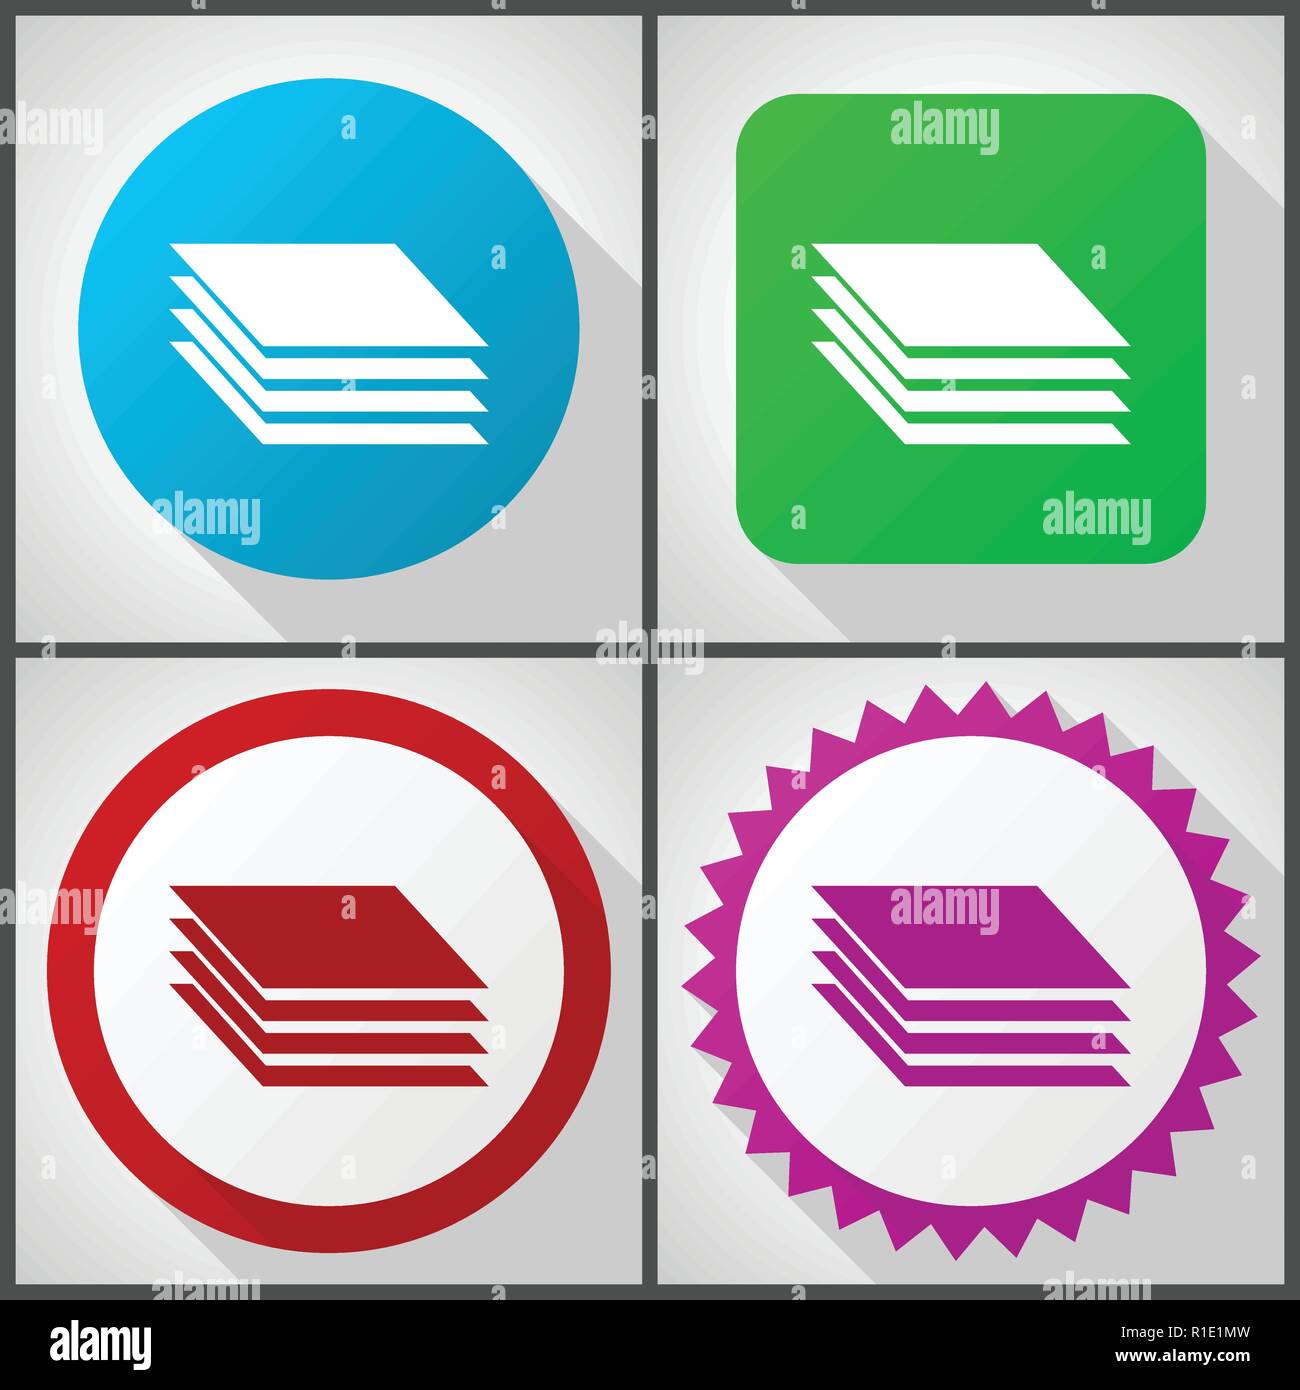 Vector icons with 4 options. Layers flat design icon set easy to edit in eps 10. Stock Vector